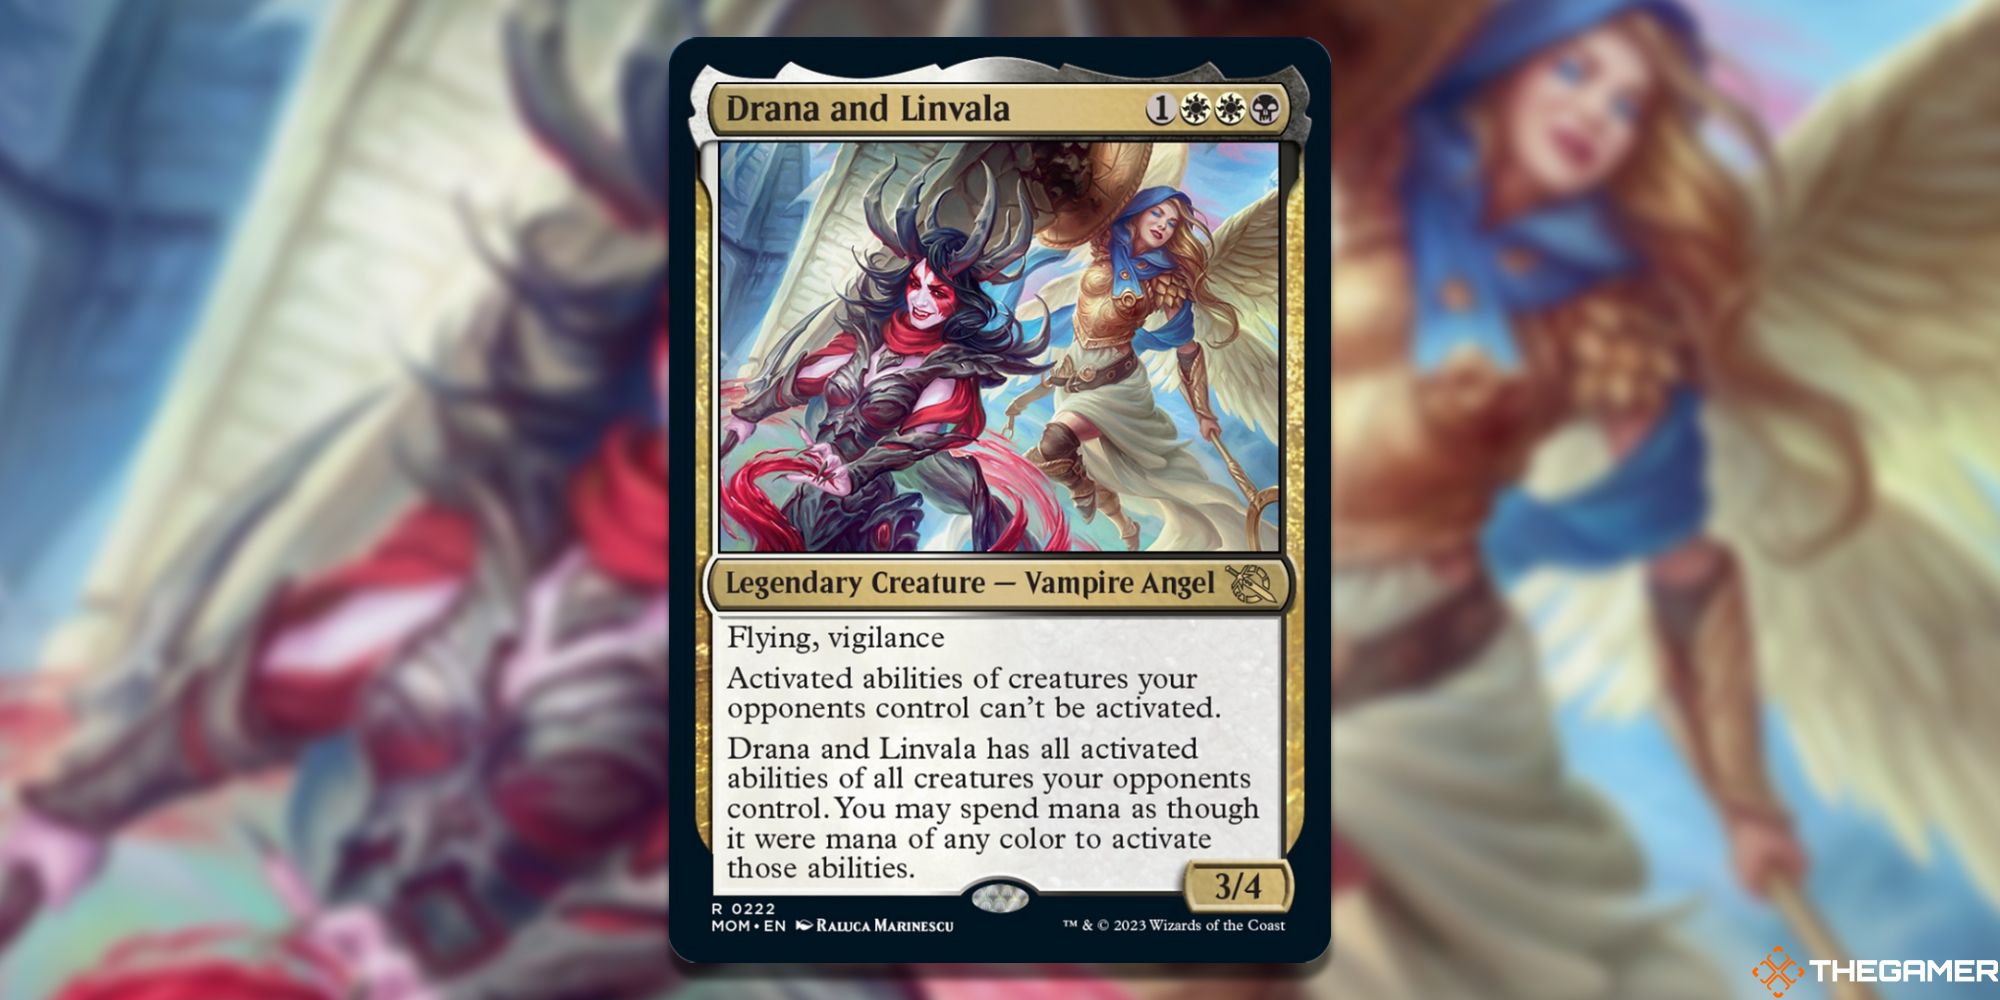 Drana and Linvala cards and artwork from Magic The Gathering.